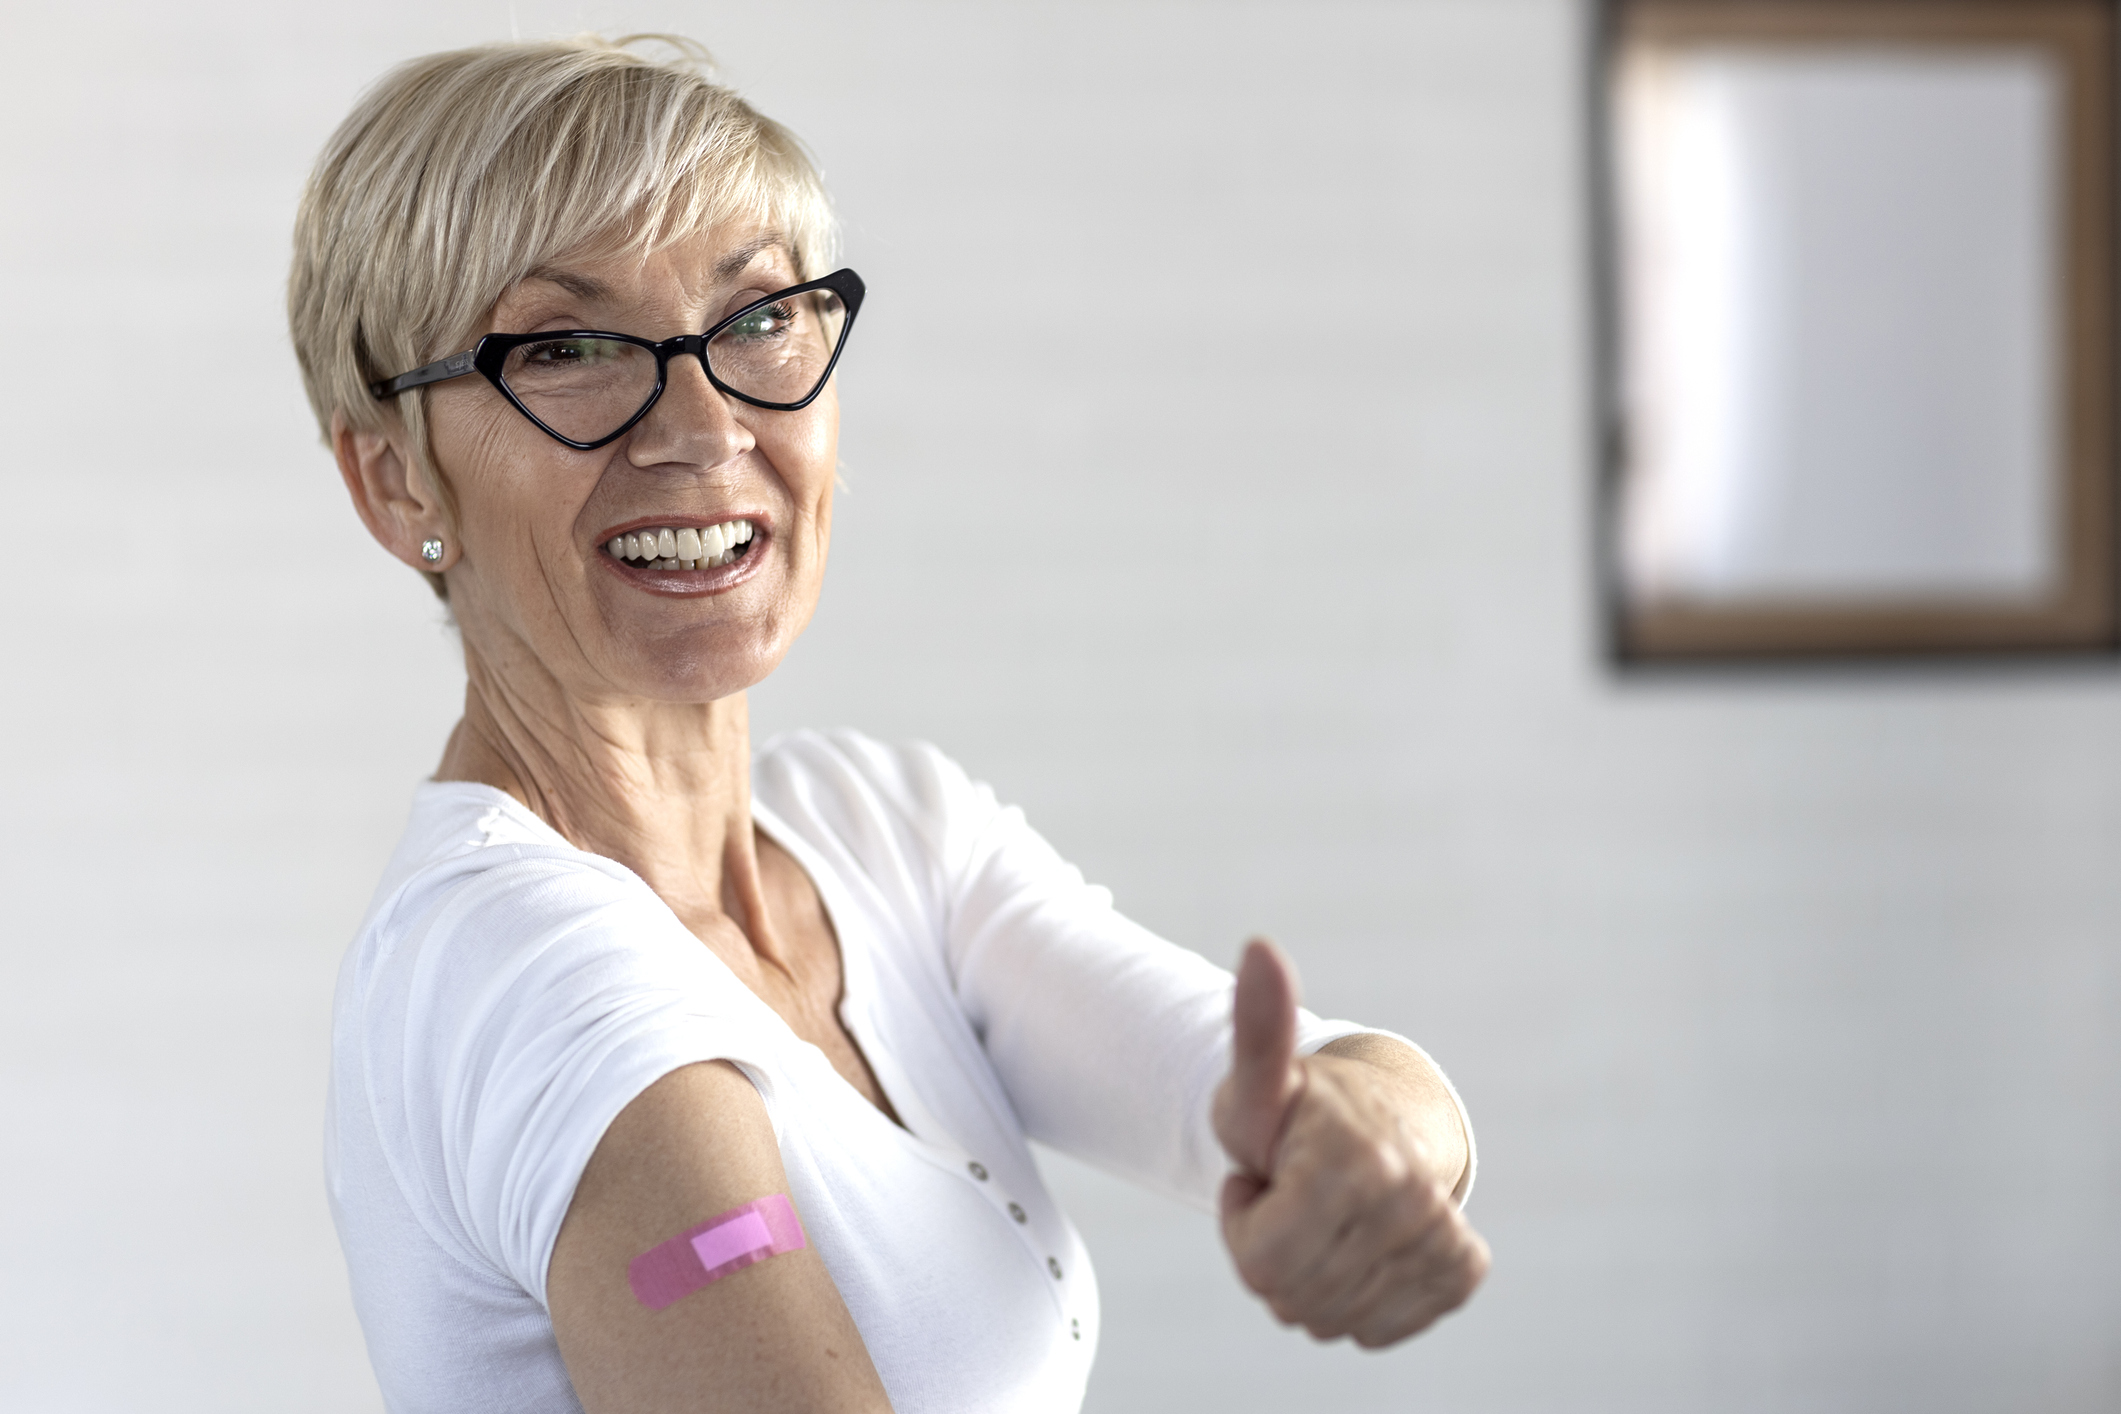 A woman giving a thumbs-up after getting a shot.